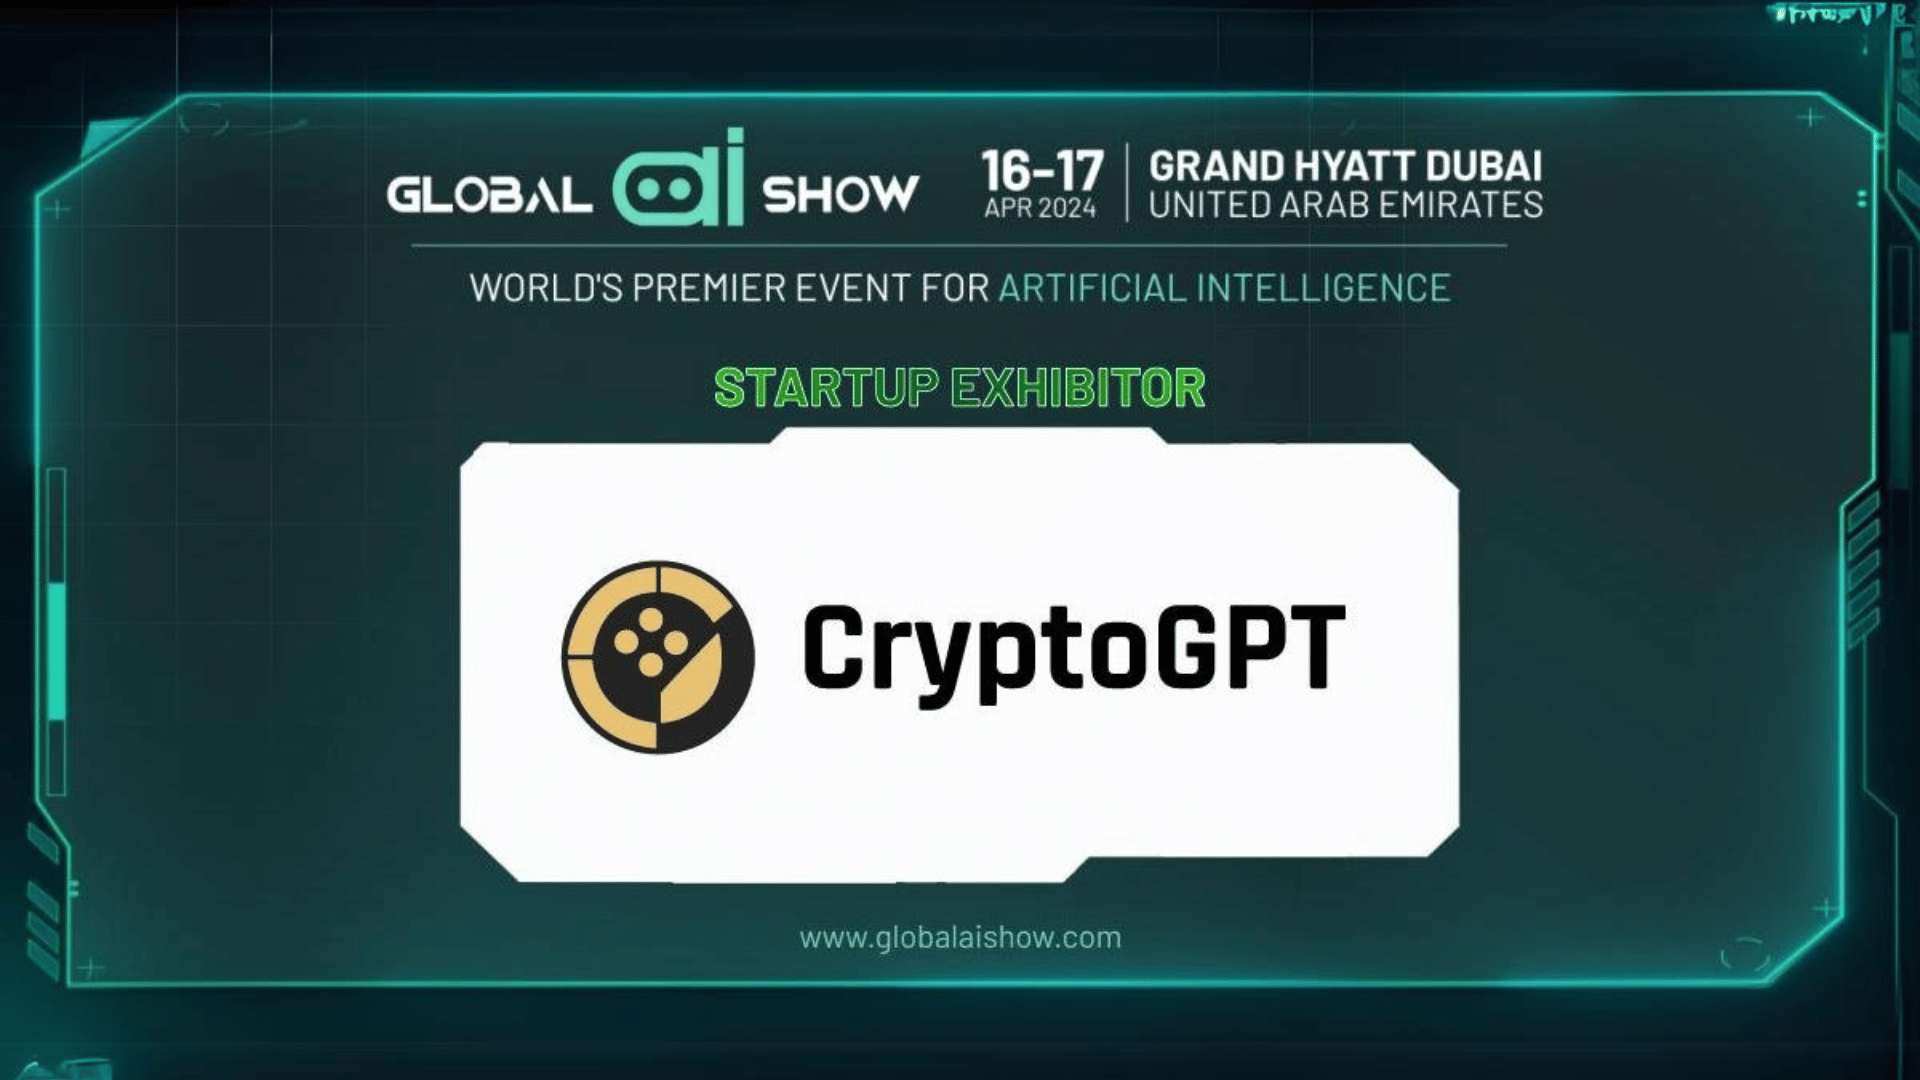 cryptogpt at global ai show